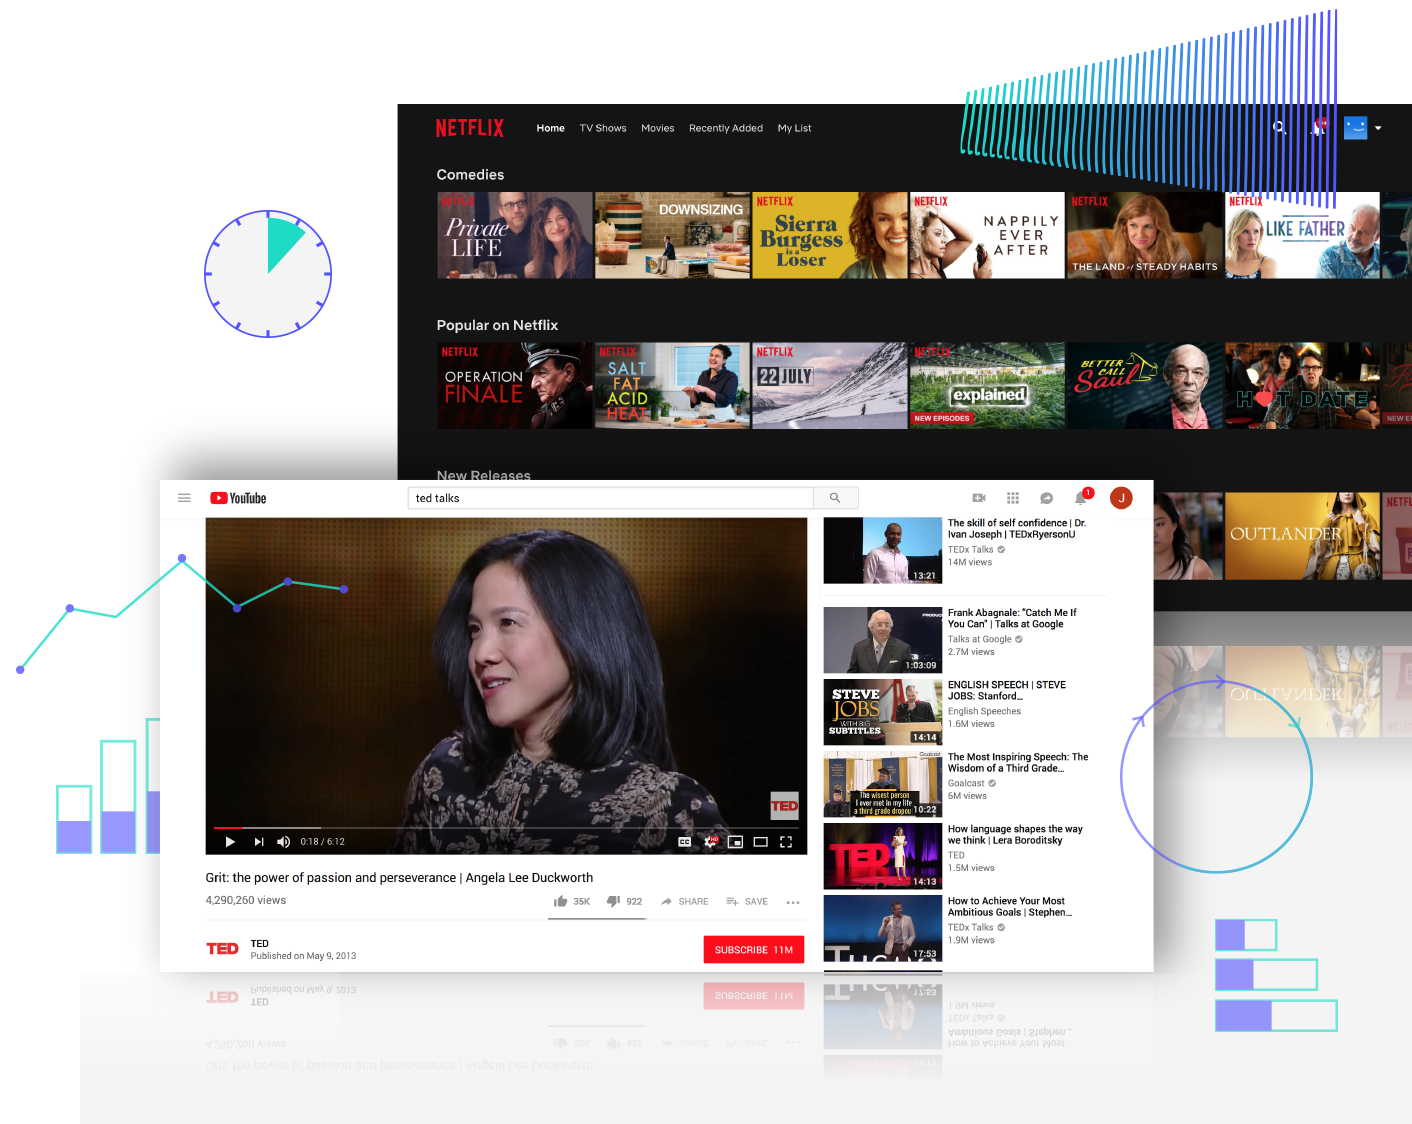 Personalized Content Overview: Collected screenshots of YouTube and Netflix's user experience with decorative styling. The focus is on the intelligent recommendations both YouTube and Netflix offer.